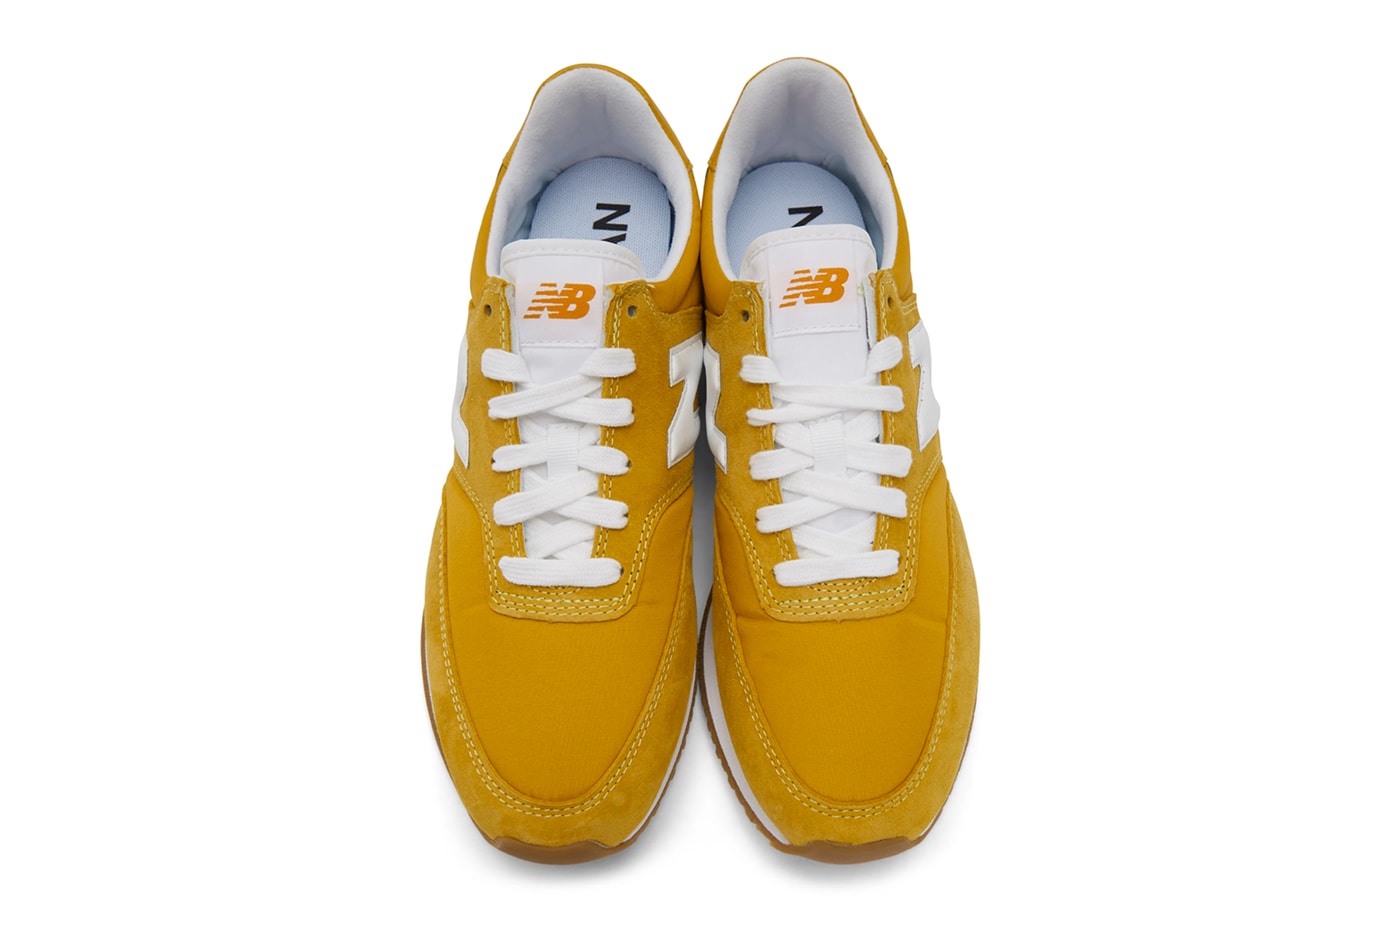 Junya Watanabe New Balance COMP 100 Yellow menswear streetwear sneakers shoes footwear spring summer 2020 collection leather suede kicks trainers runners japanese designer